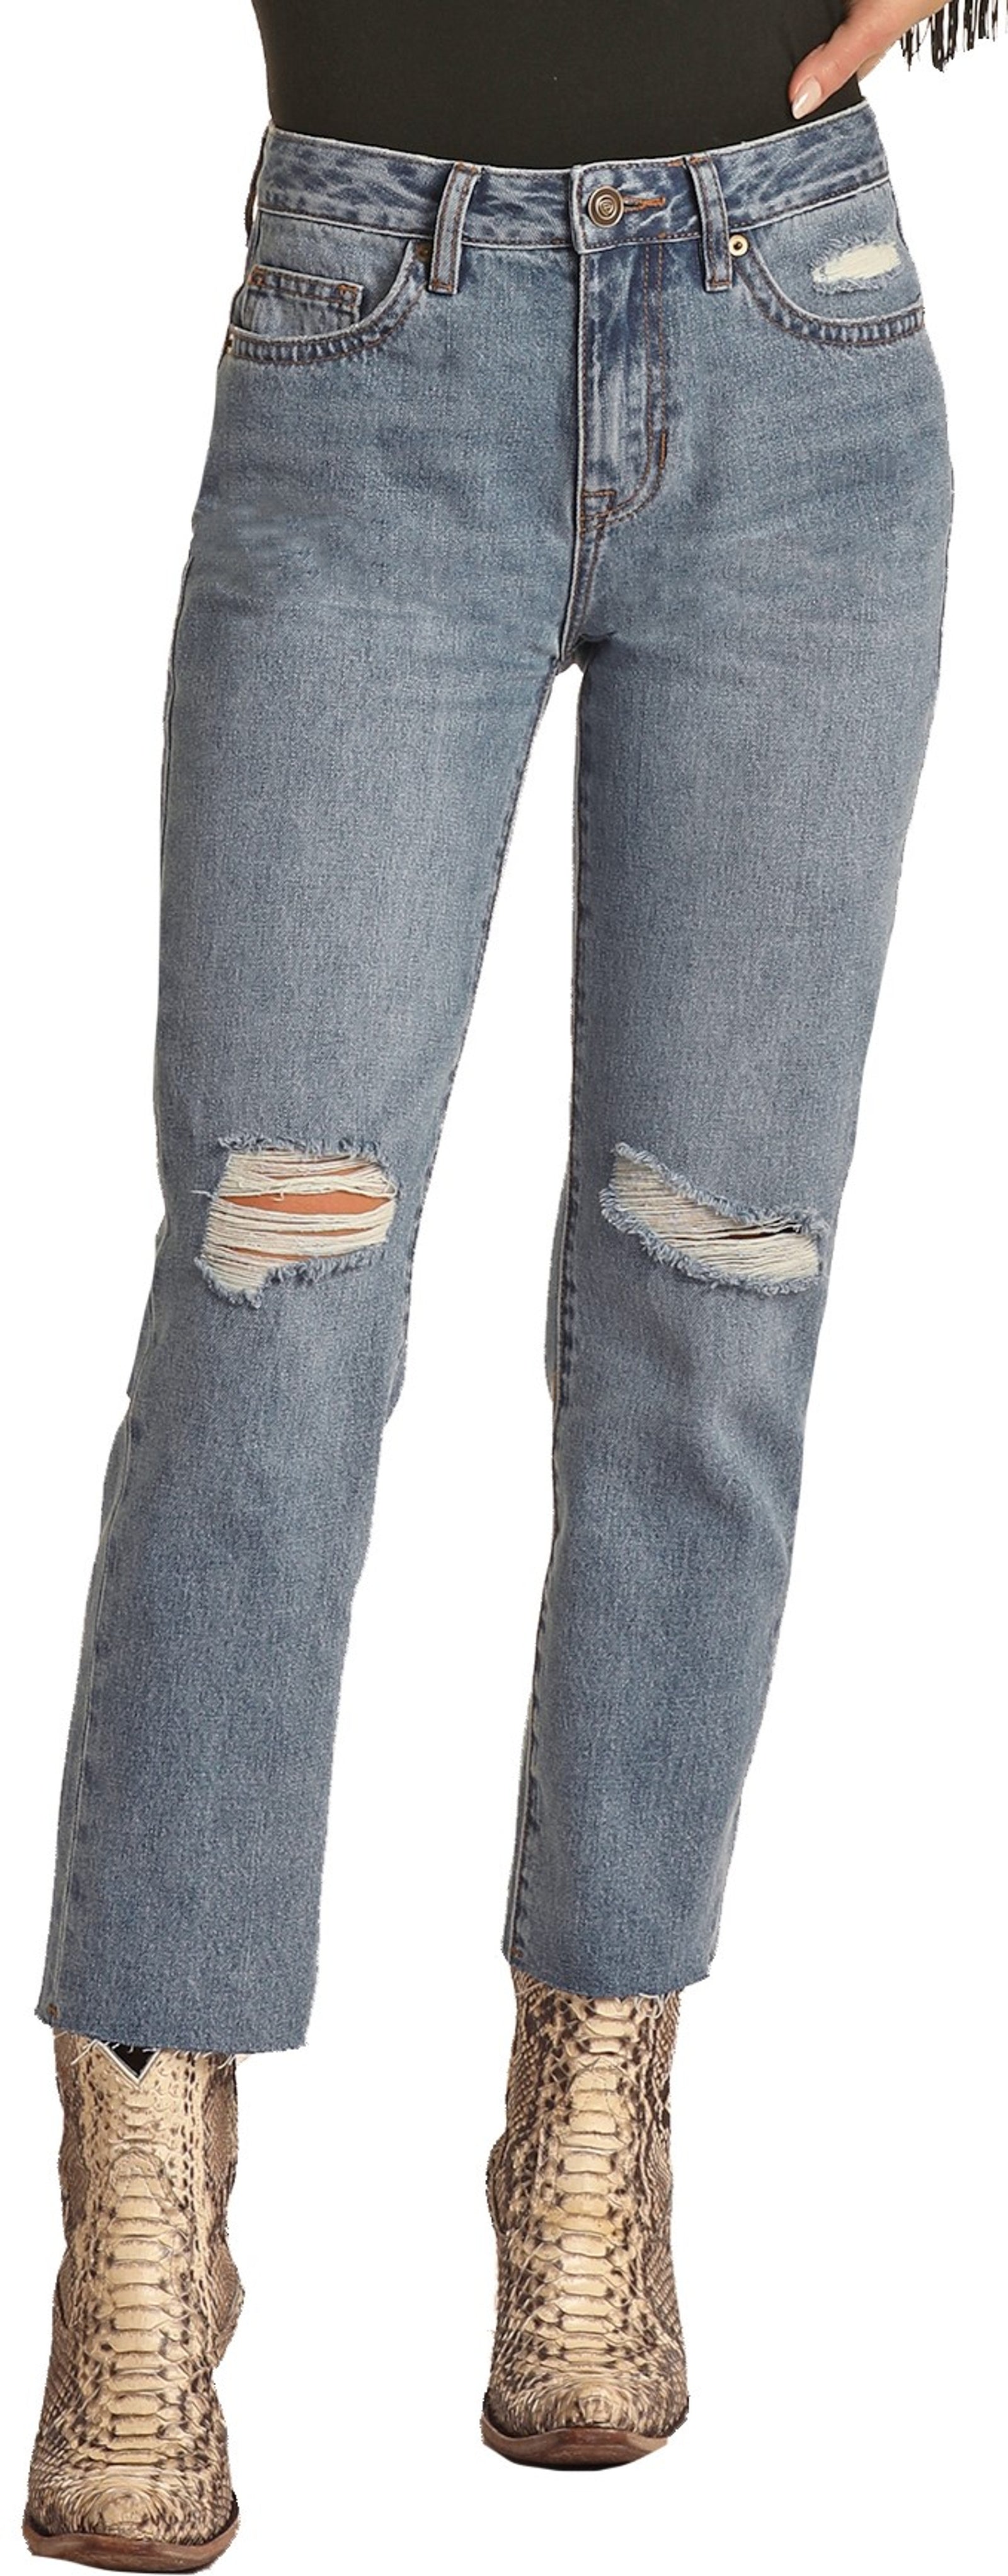 JEANS ROCK & ROLL DENIM HIGH RISE DISTRESSED STRAIGHT CROPPED DAMA